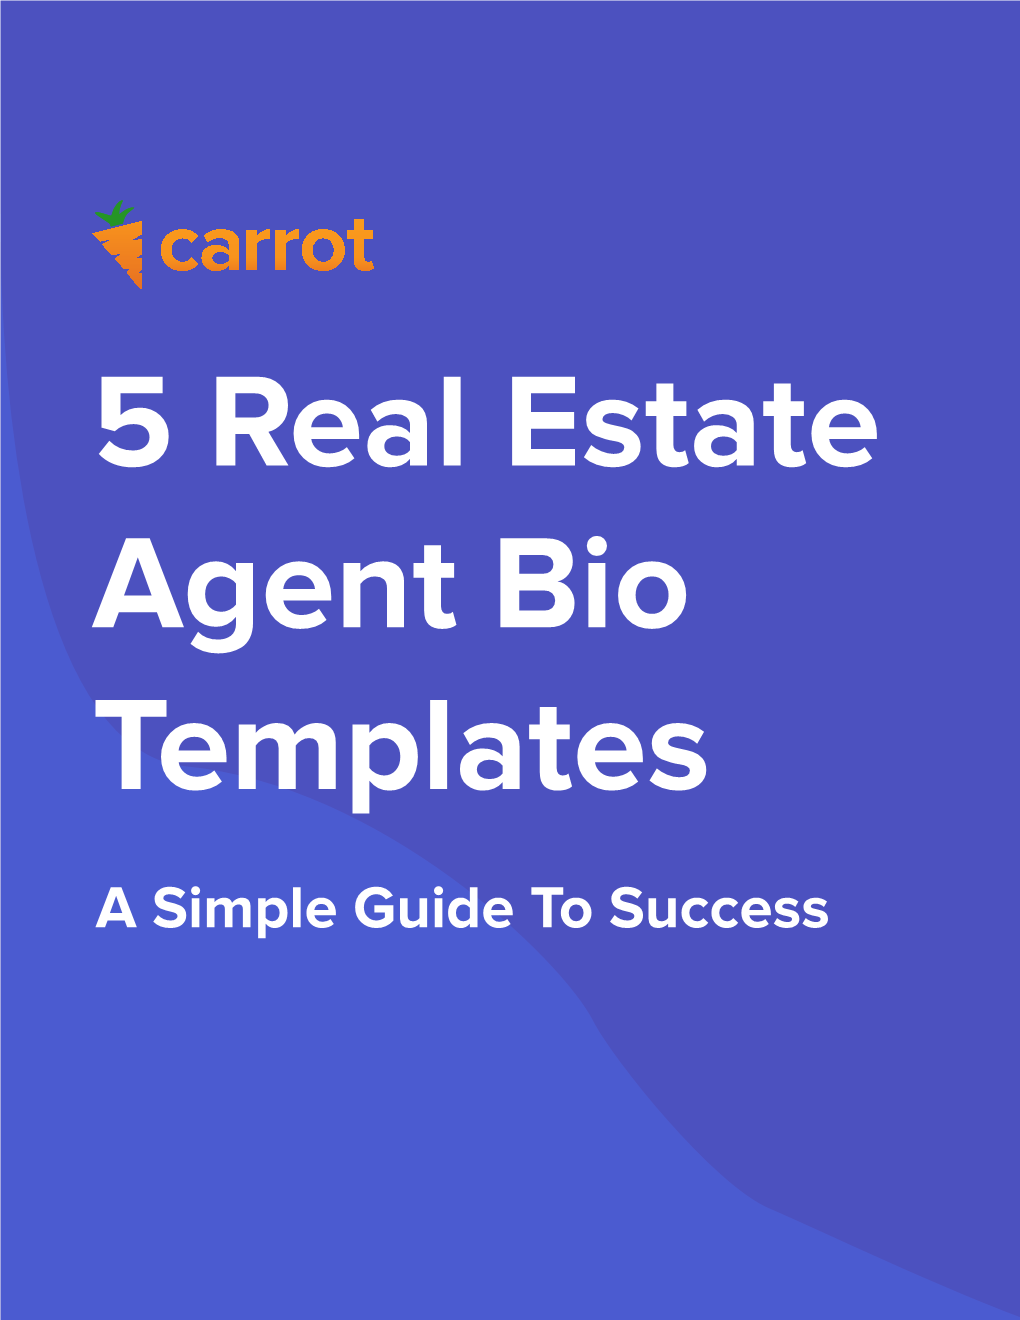 A Simple Guide to Success As a Real Estate Agent, You Are What People Buy Into